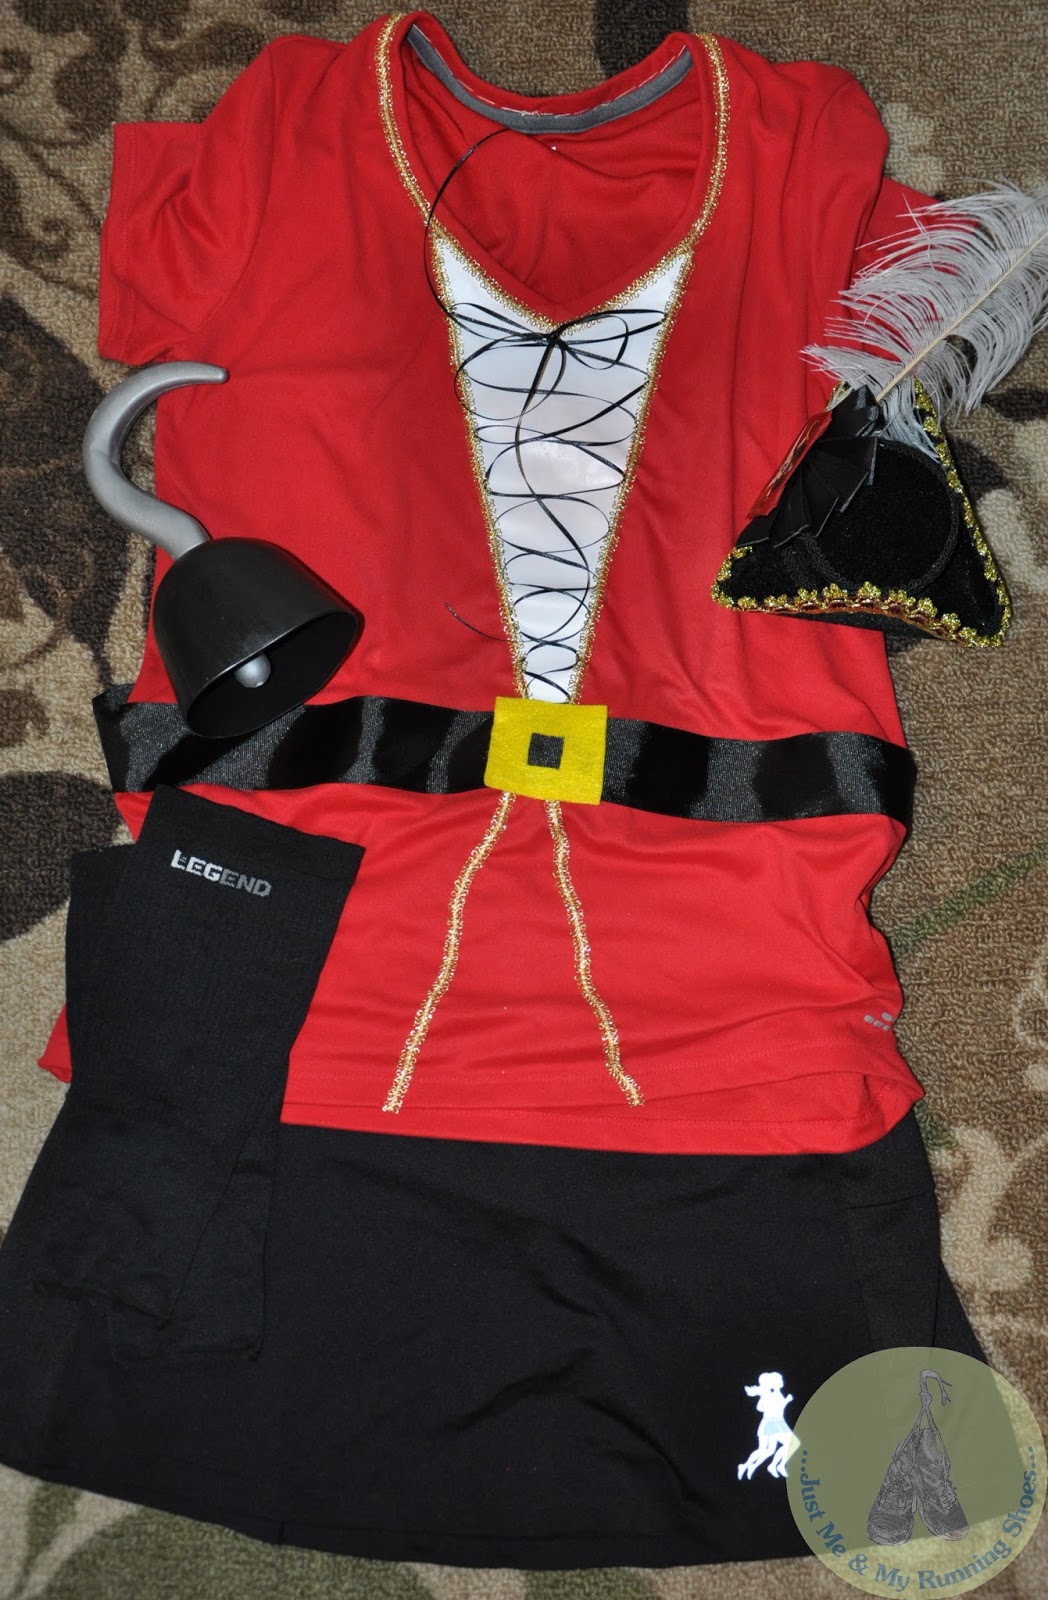 Just Me and My Running Shoes: Captain Hook runDisney Costume